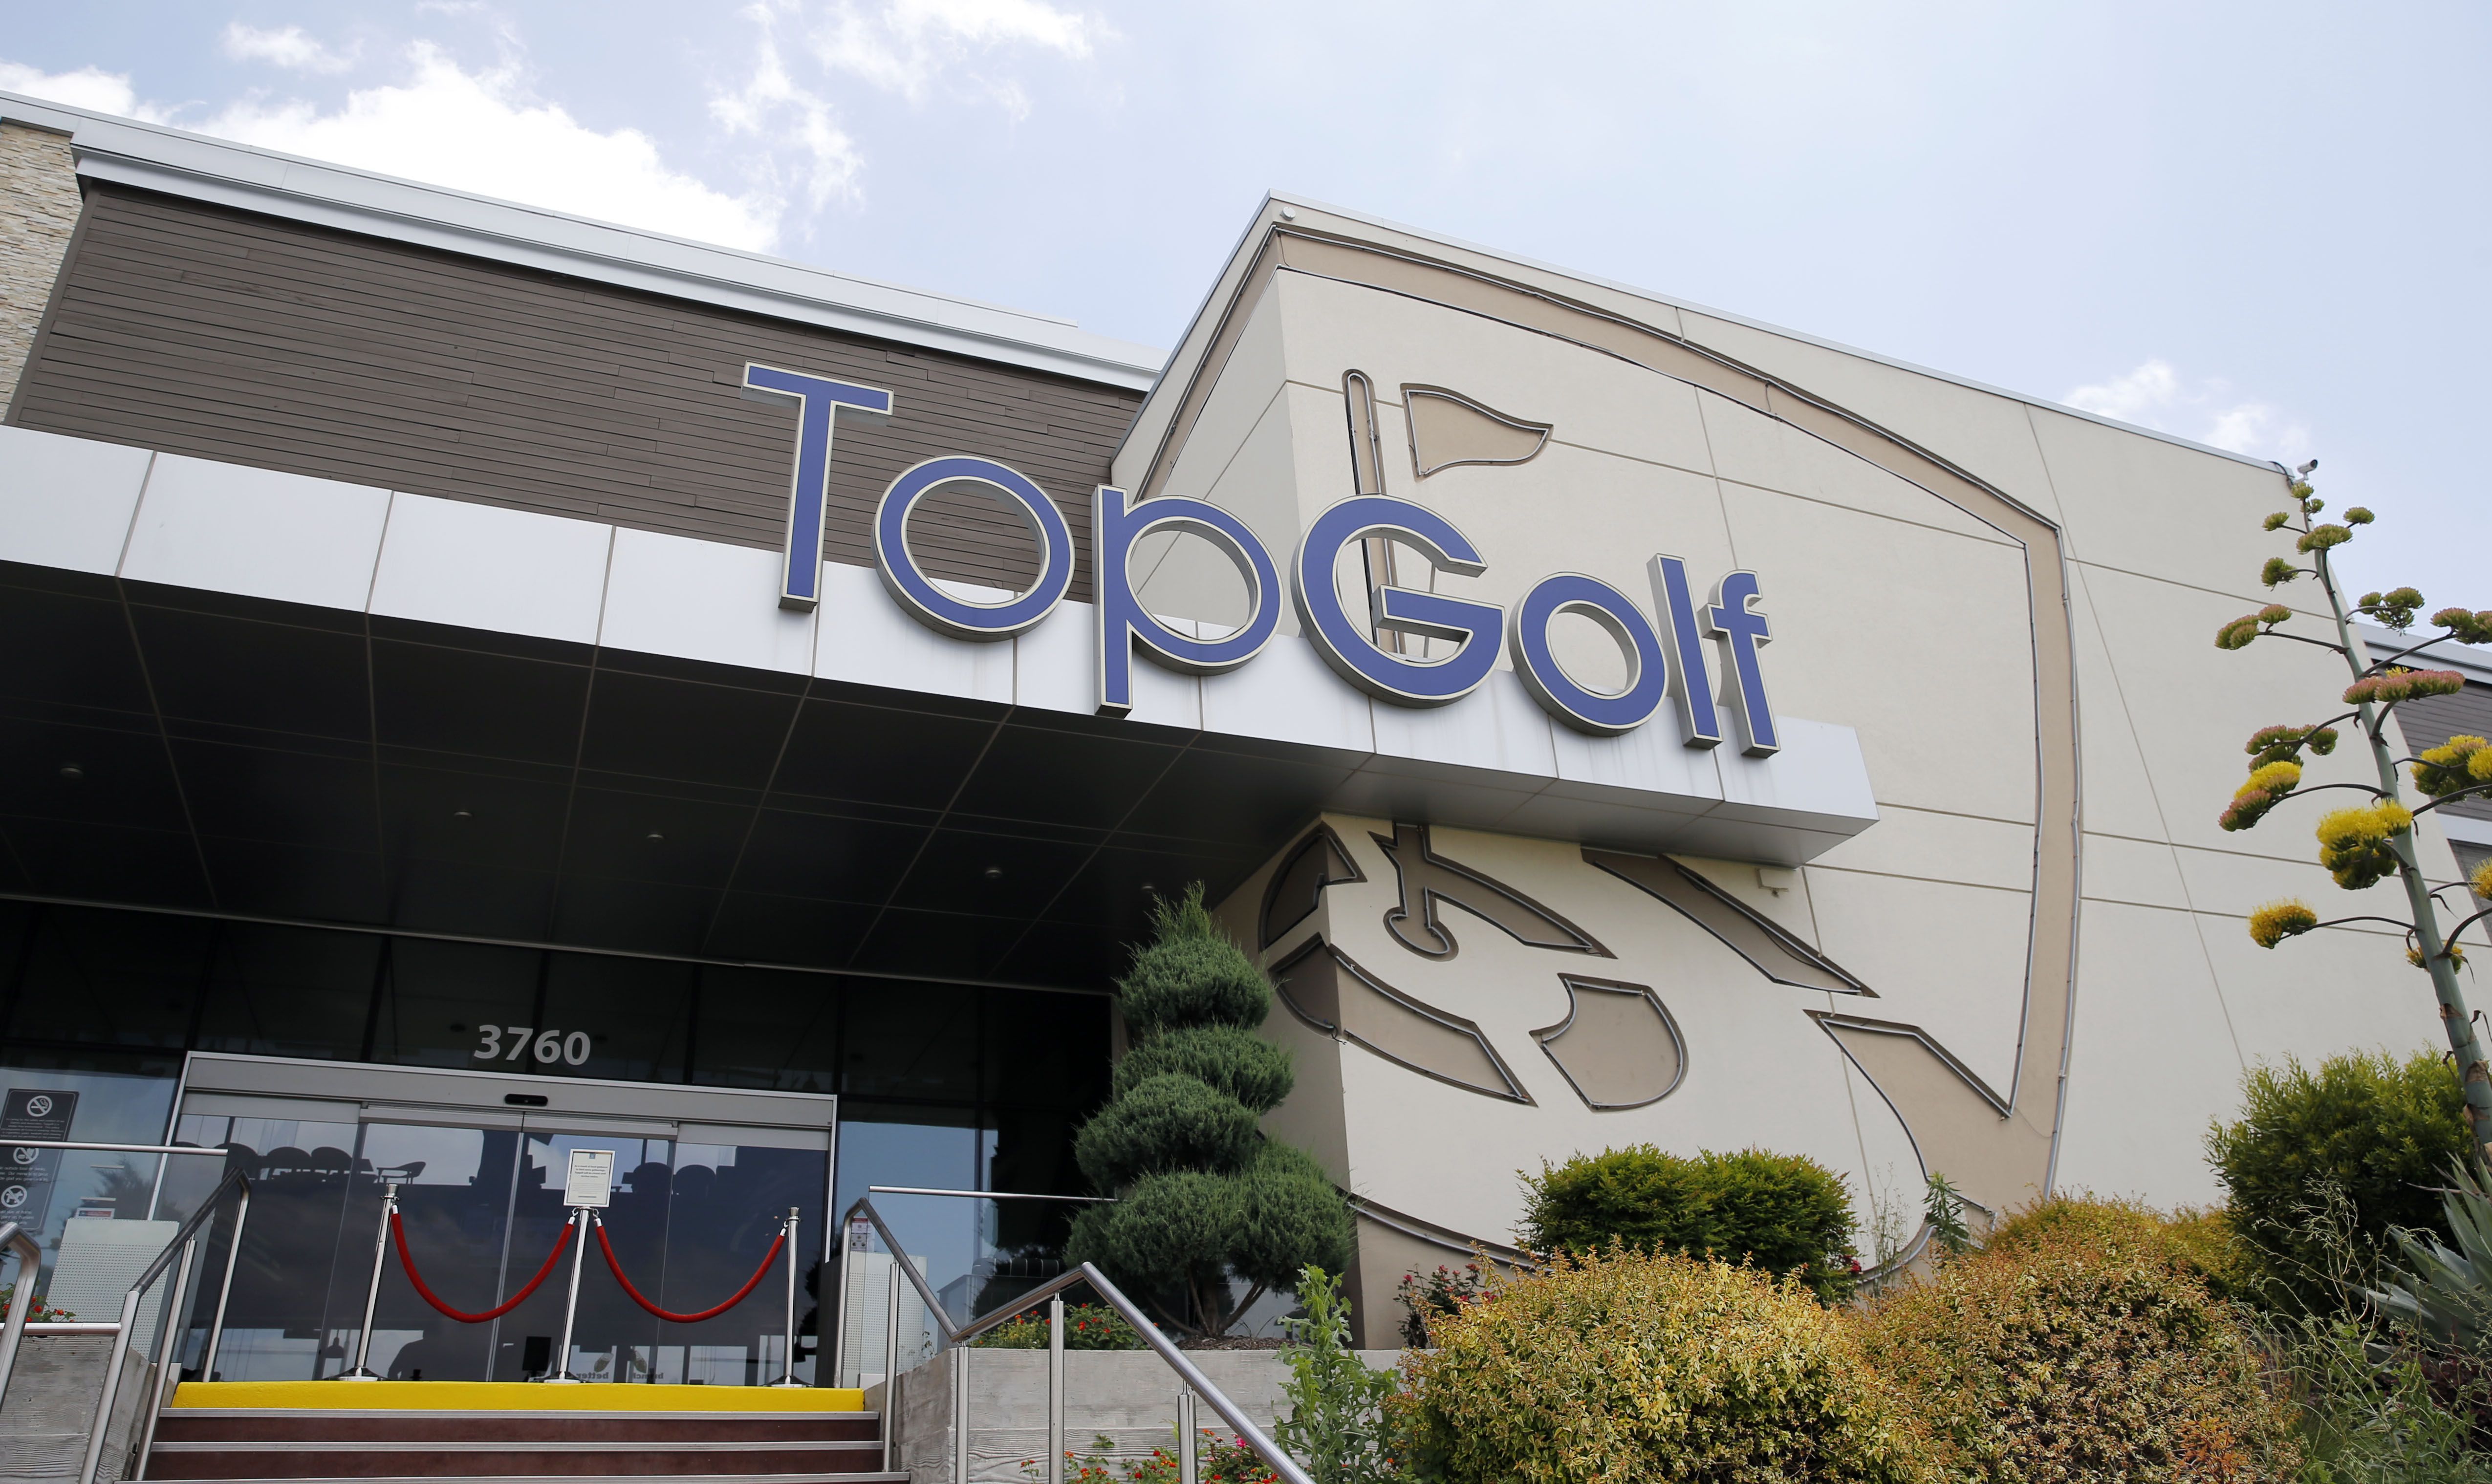 Topgolf Houston-Spring  Things To Do in Spring, TX